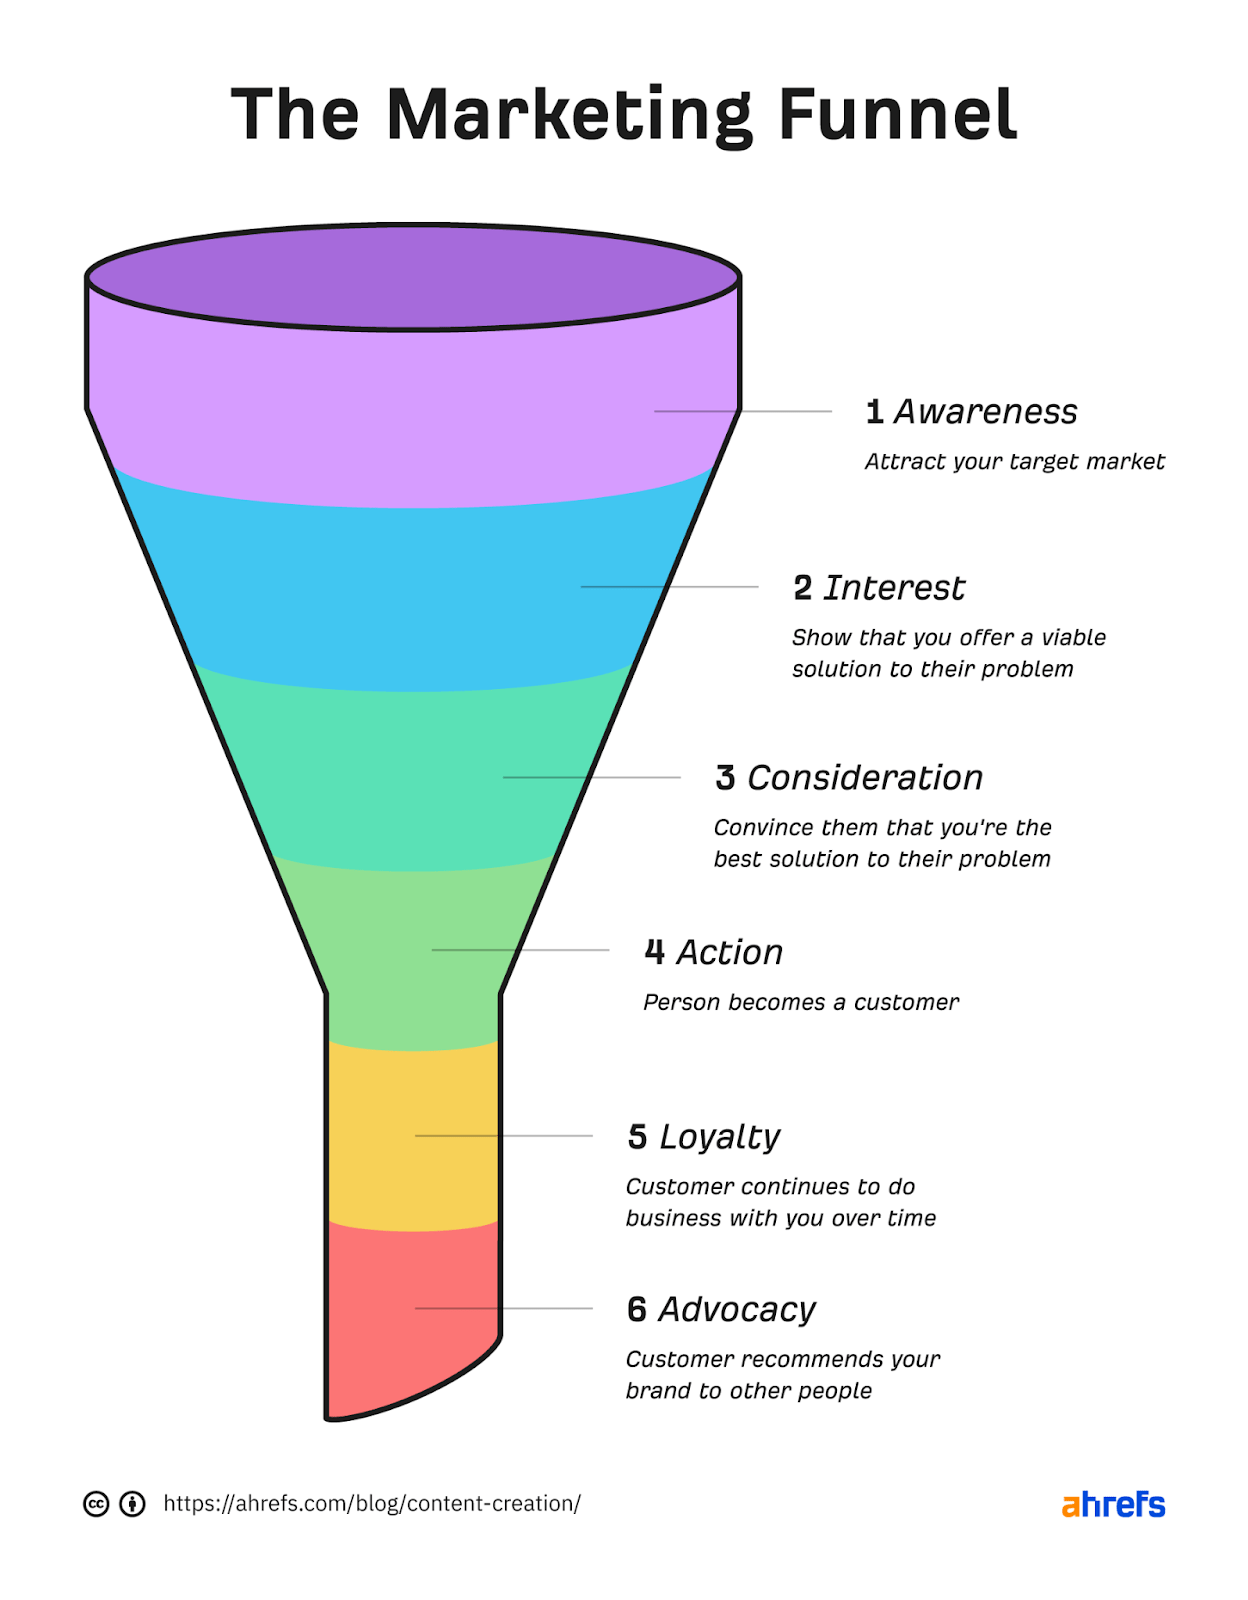 Funnel with 6 sections. From top to bottom (Awareness, Interest, Consideration, Action, Loyalty, Advocacy)